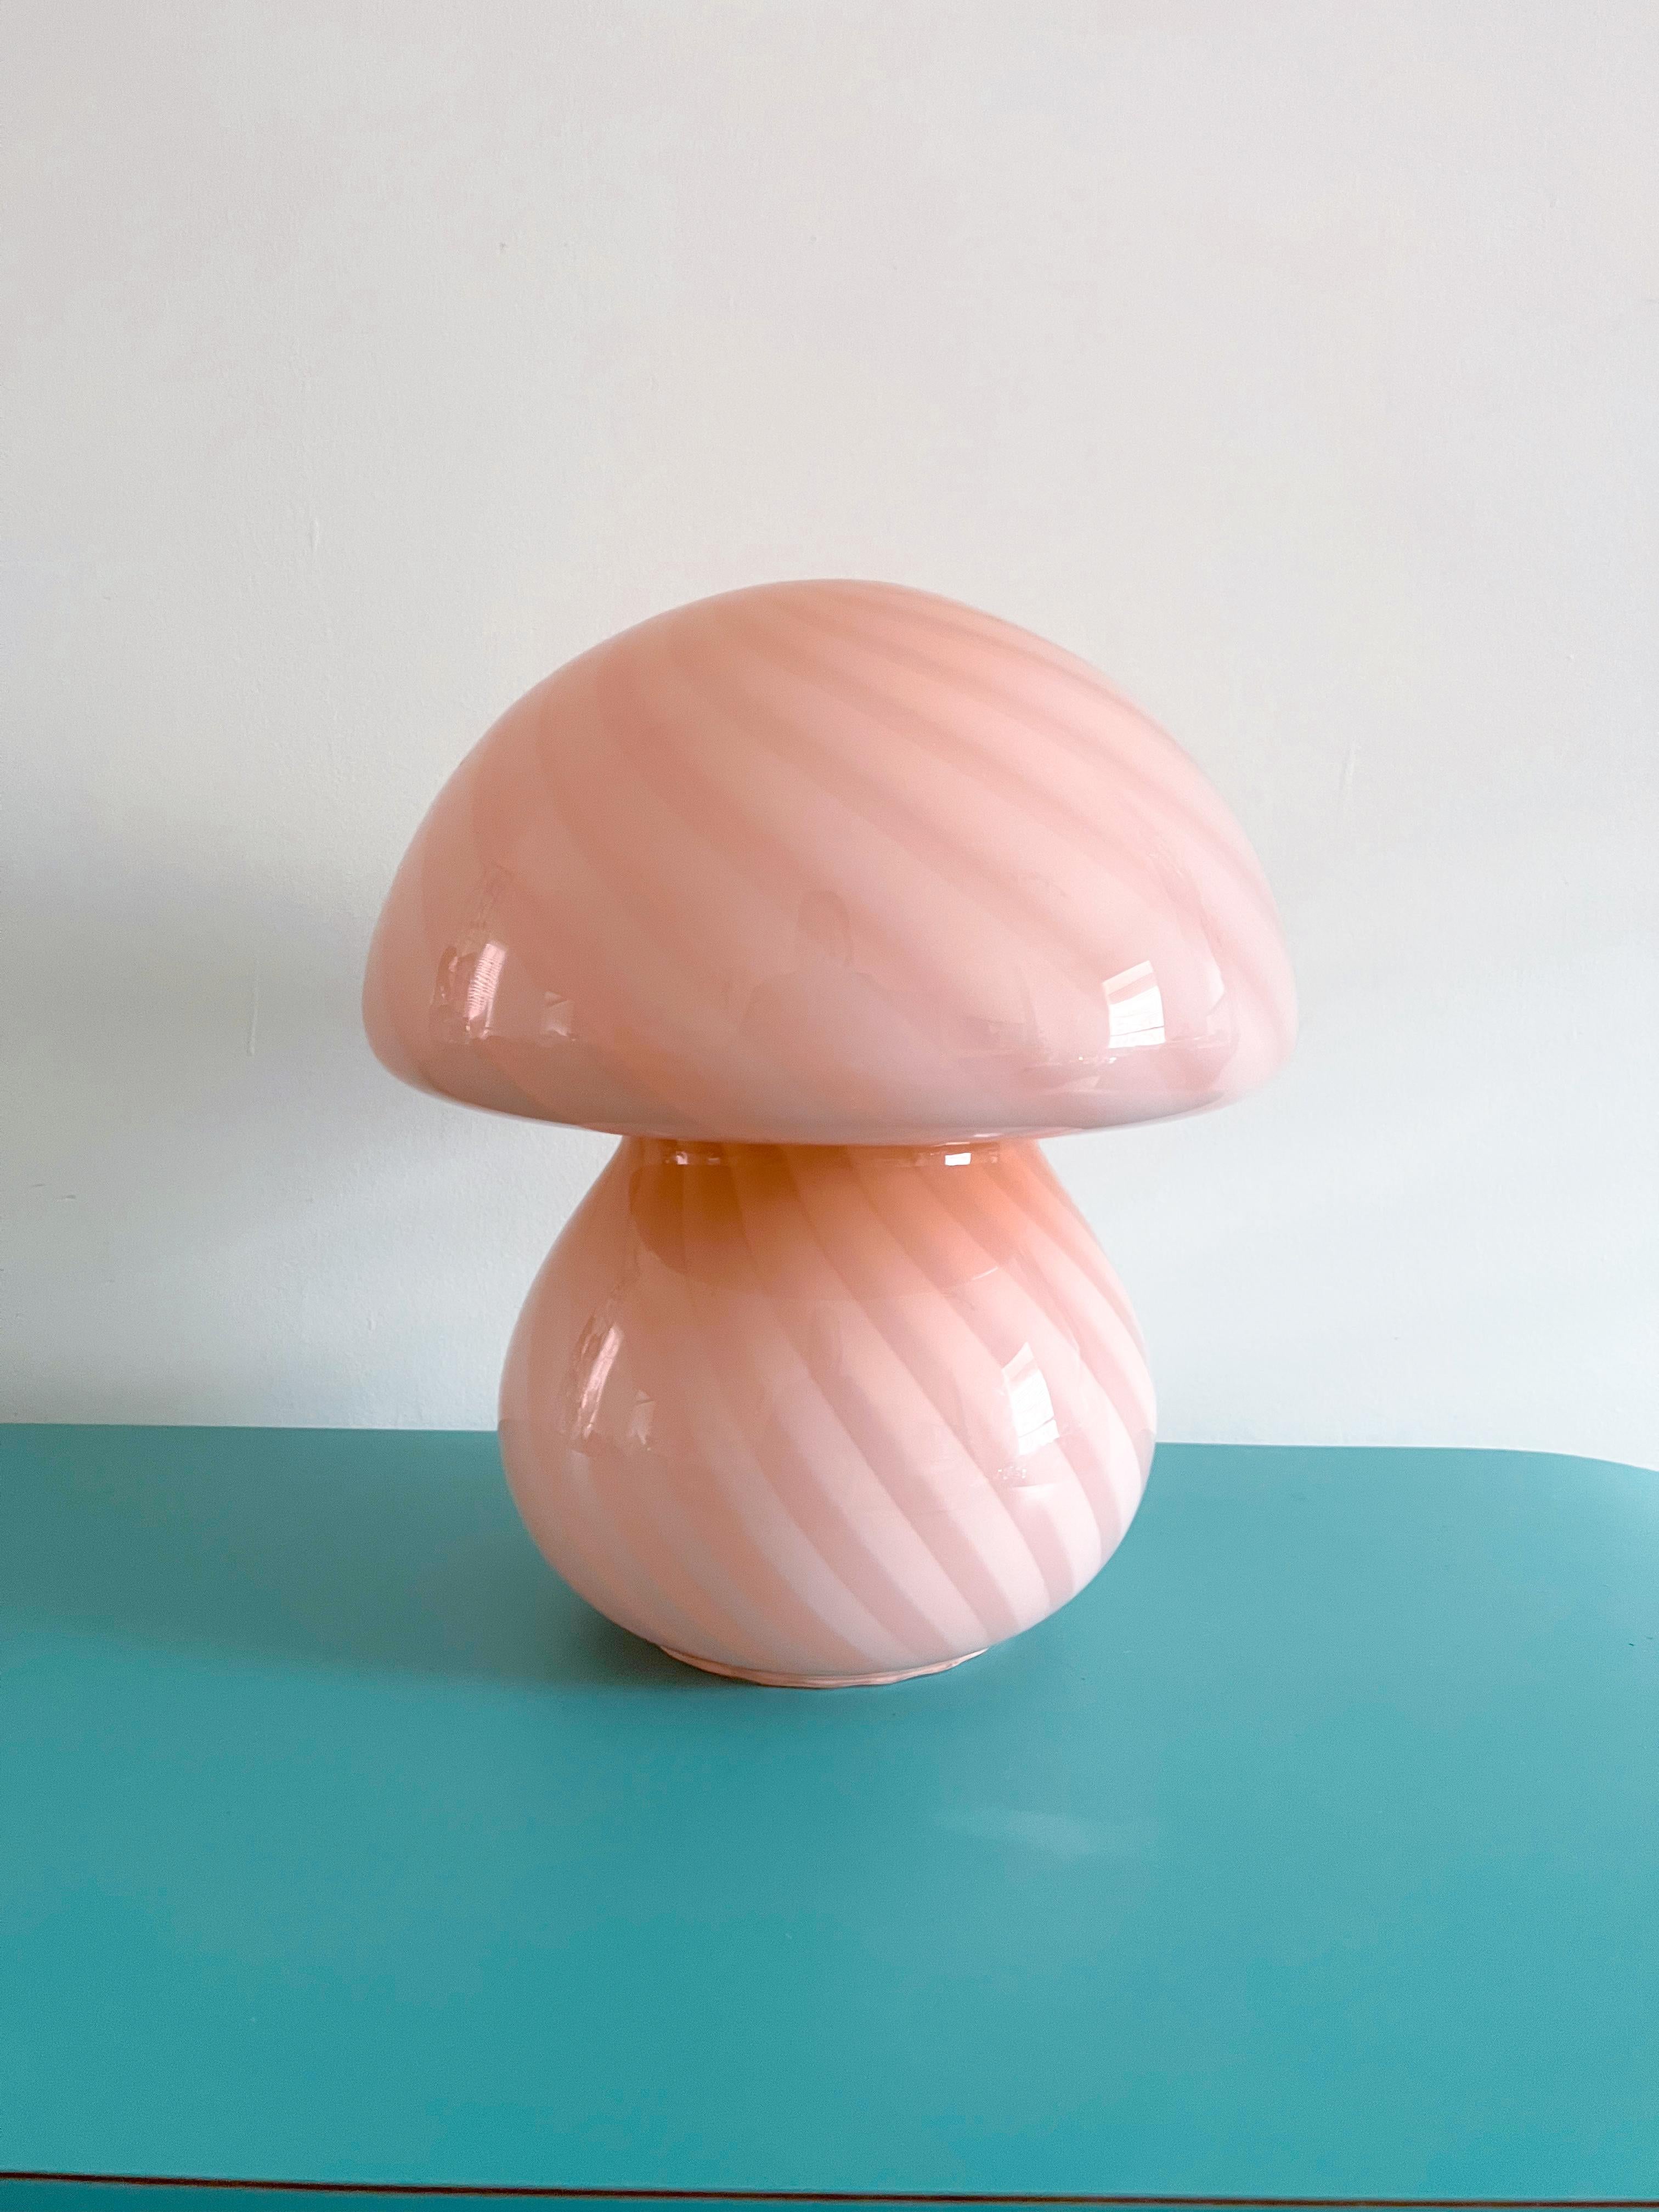 Wonderful large pink mushroom murano lamp made in the 1970s.
This amazing lamp is hand-made out of a single piece of Art glass, mouth blown and cased into its rare ‘fungo’ shape. 
Rewired in EU plug.
In excellent condition, free from any chips,